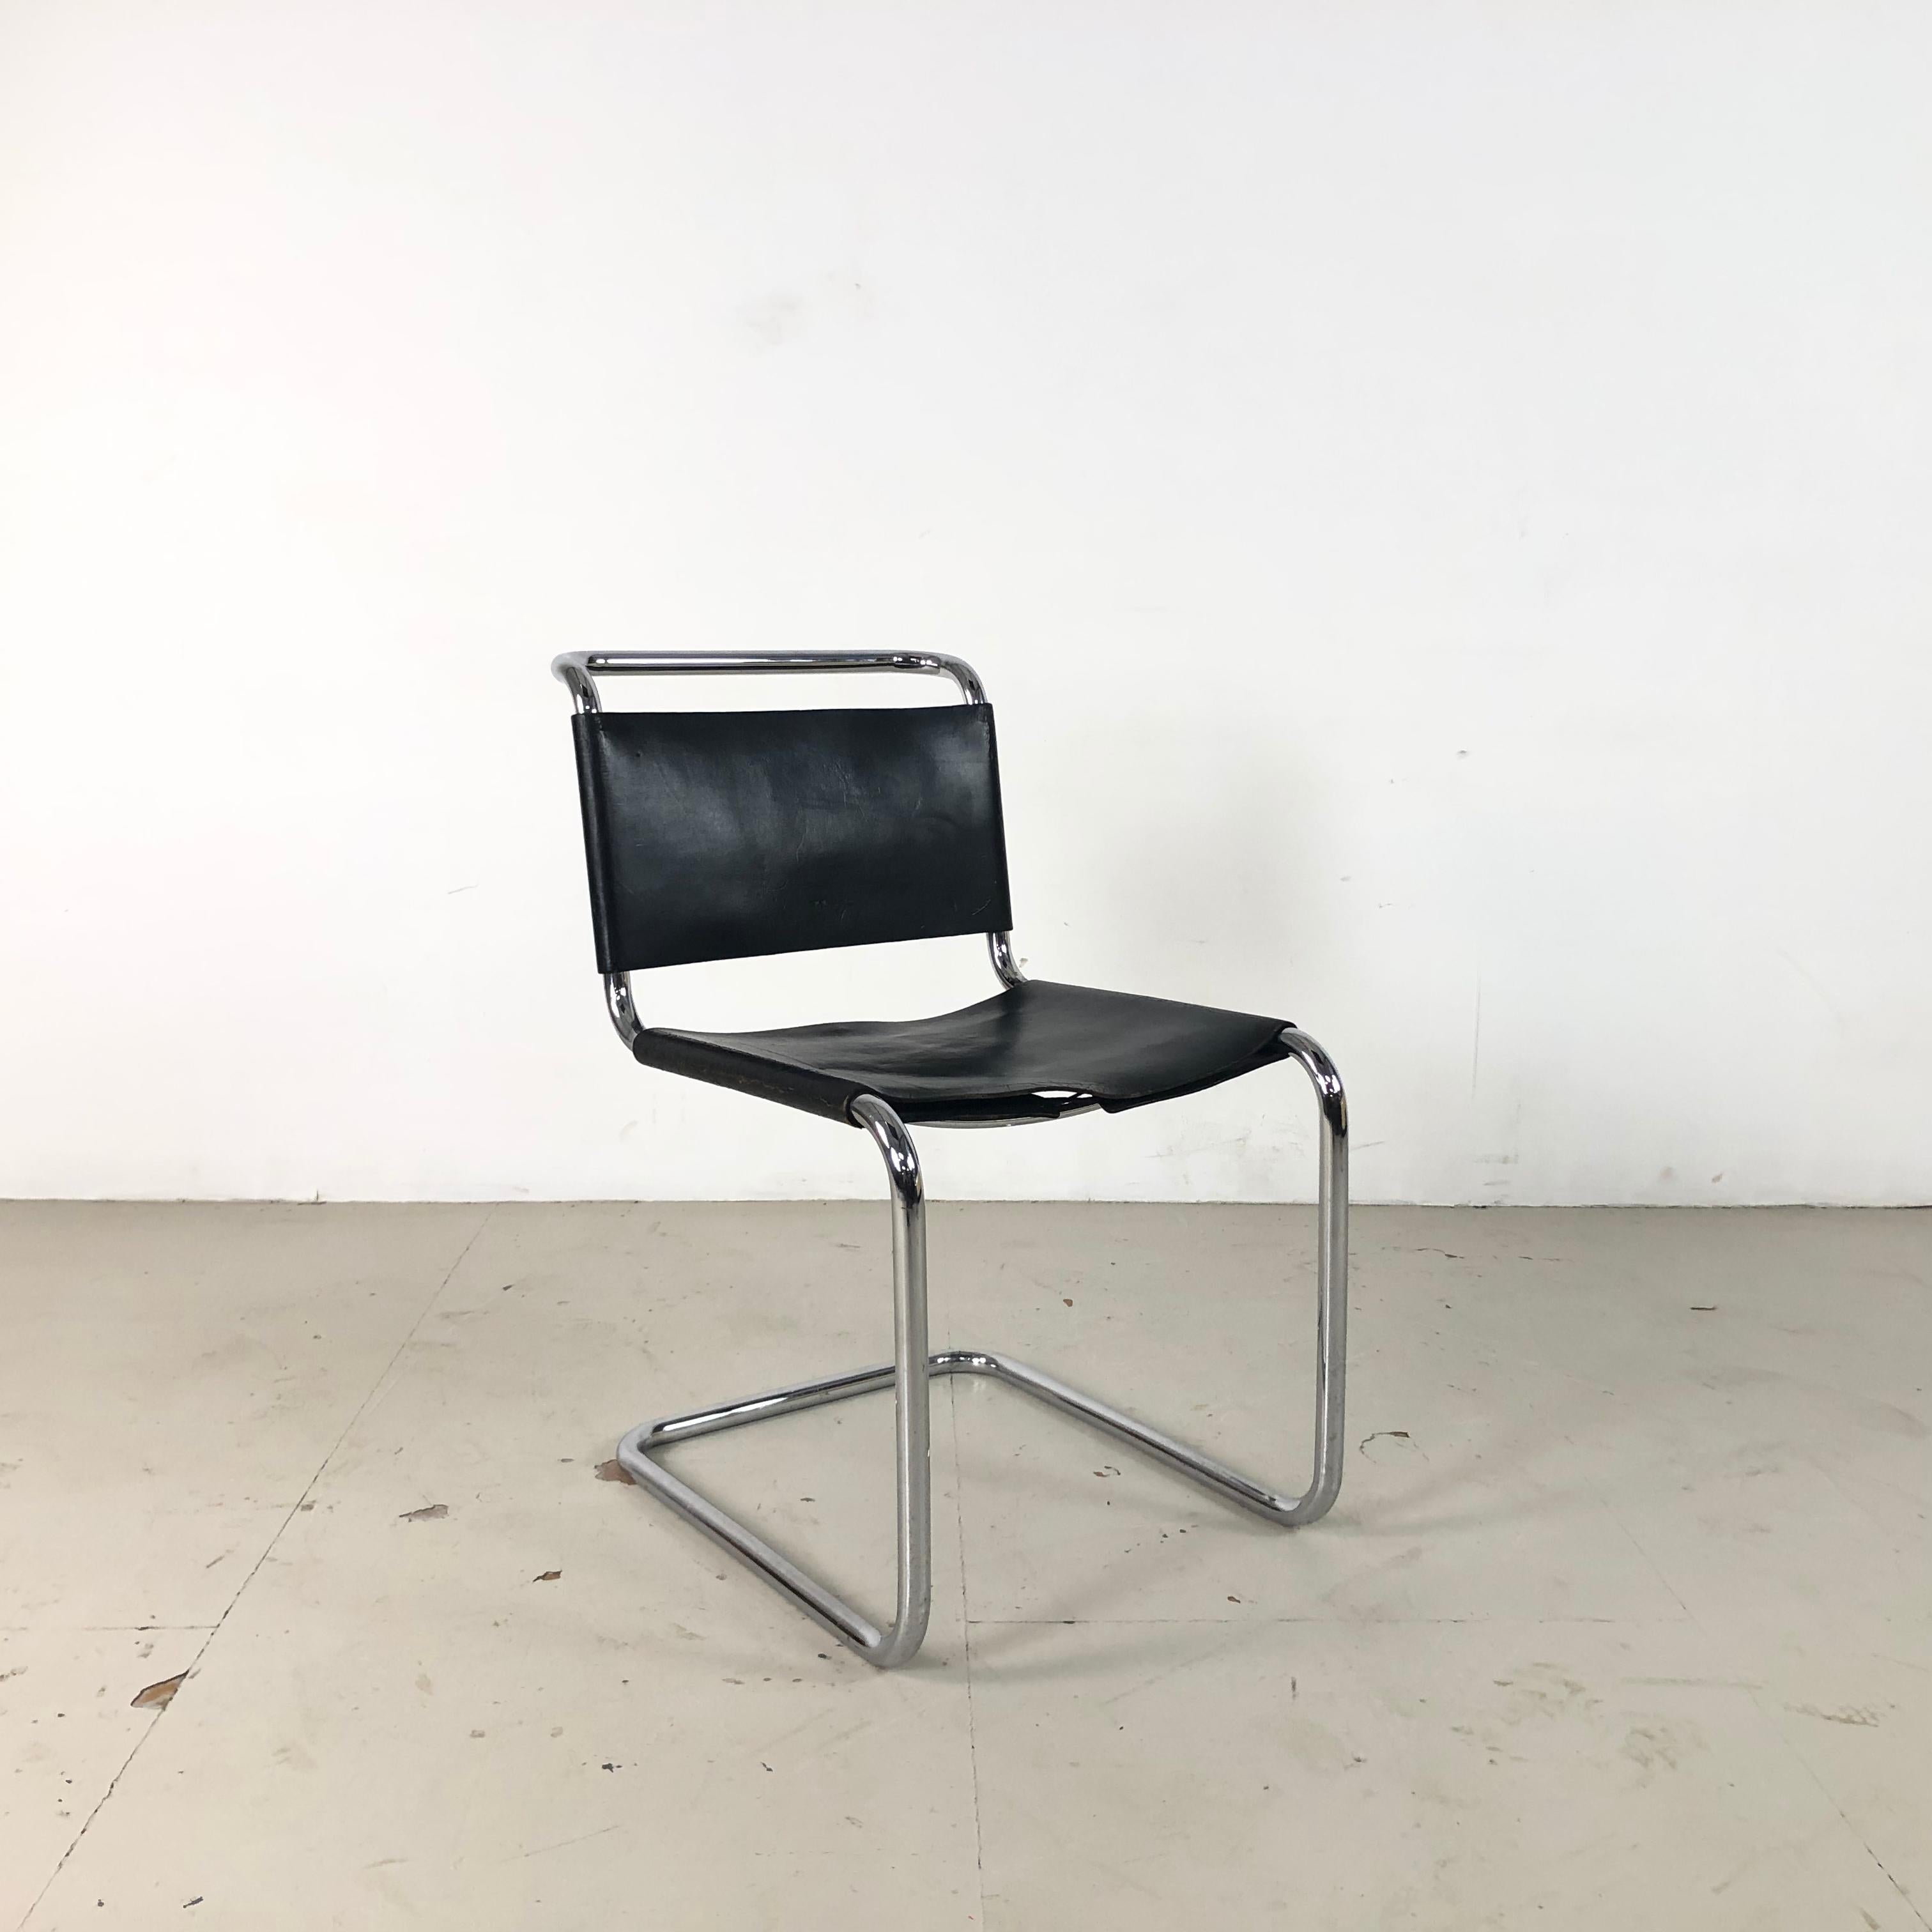 20th Century Midcentury Marcel Breuer Style Black Leather and Chrome Cantilever Dining Chair